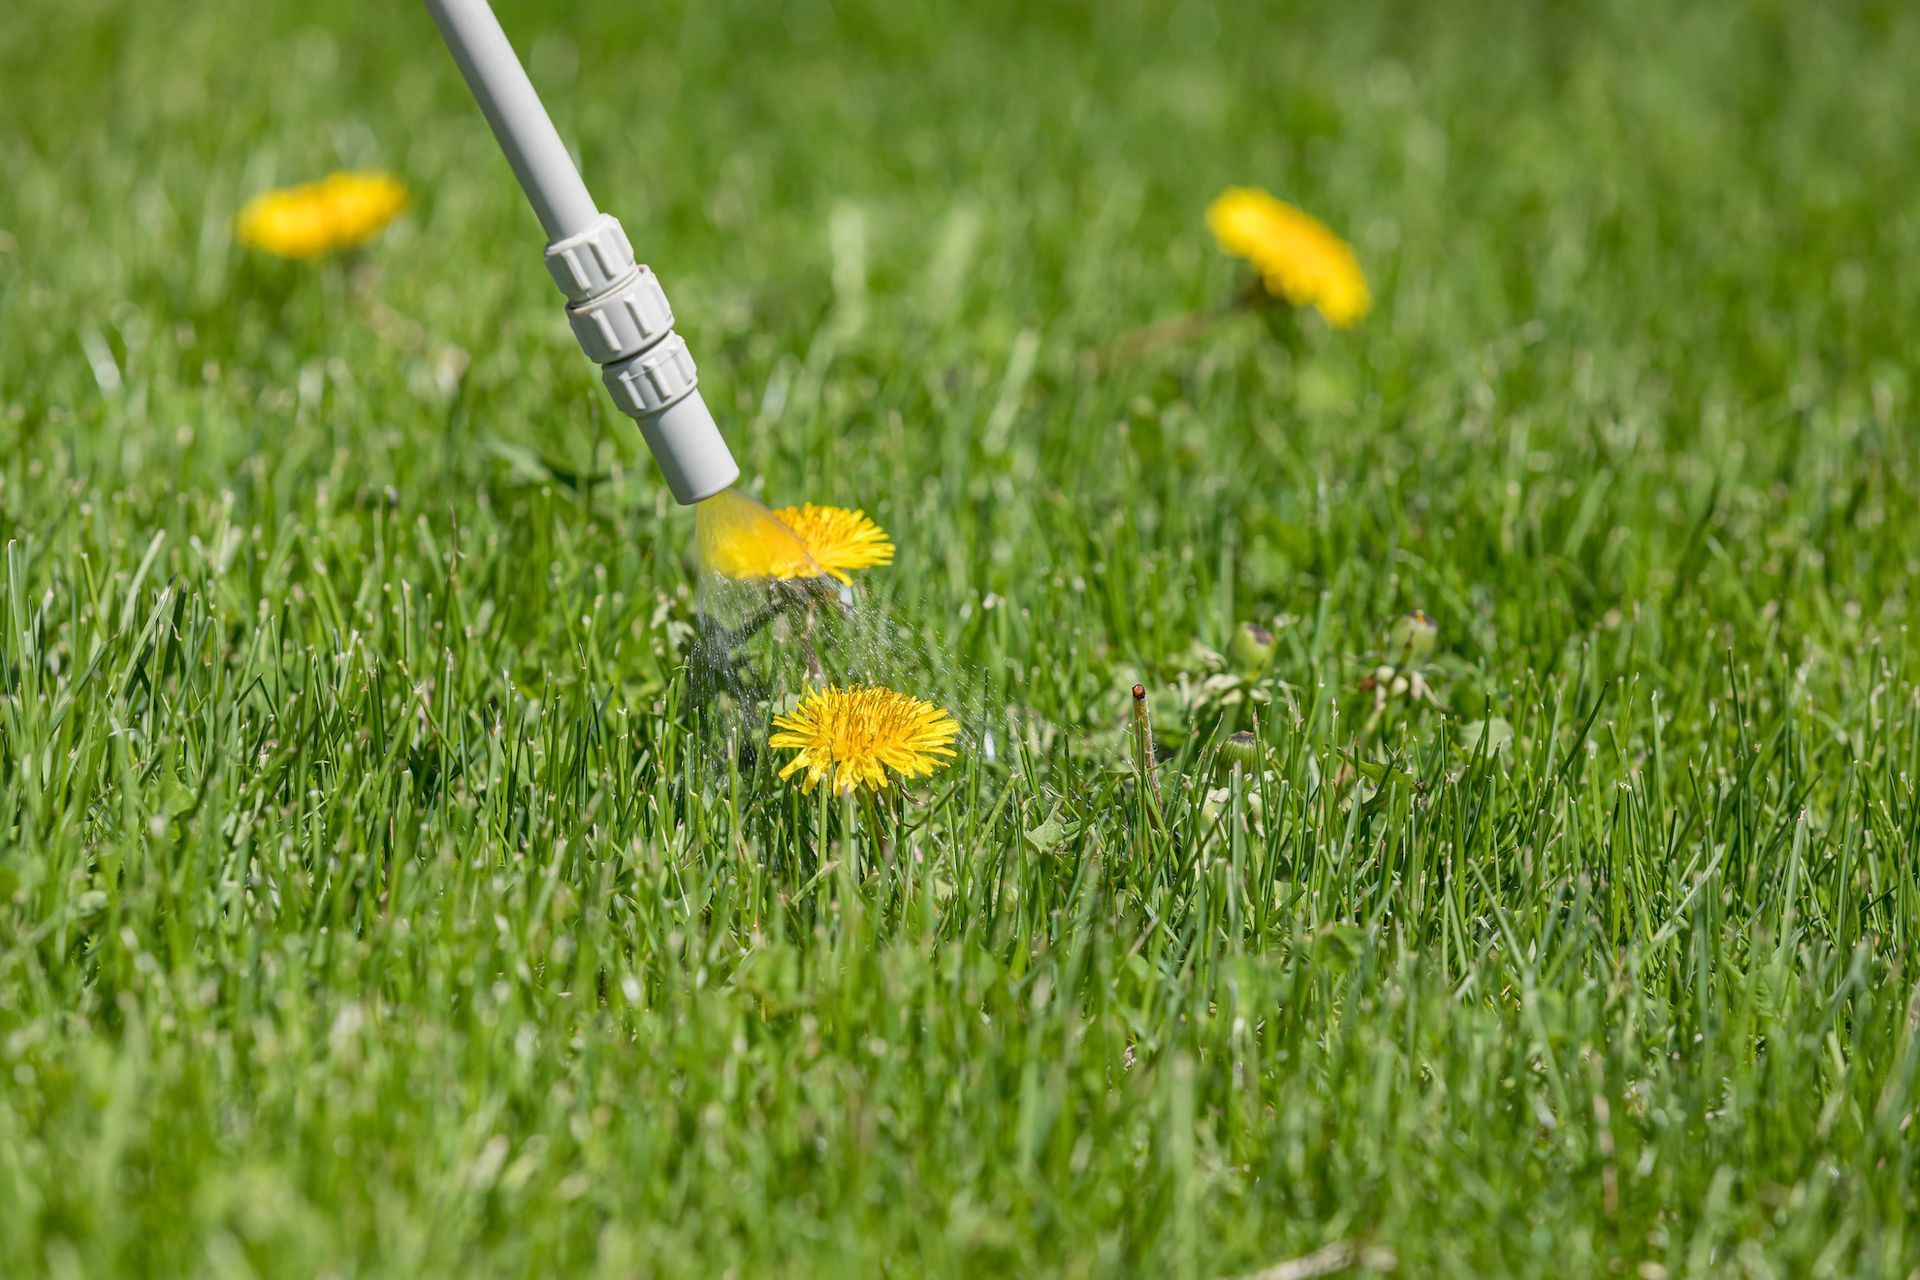 A person is spraying dandelions on a lush green lawn.